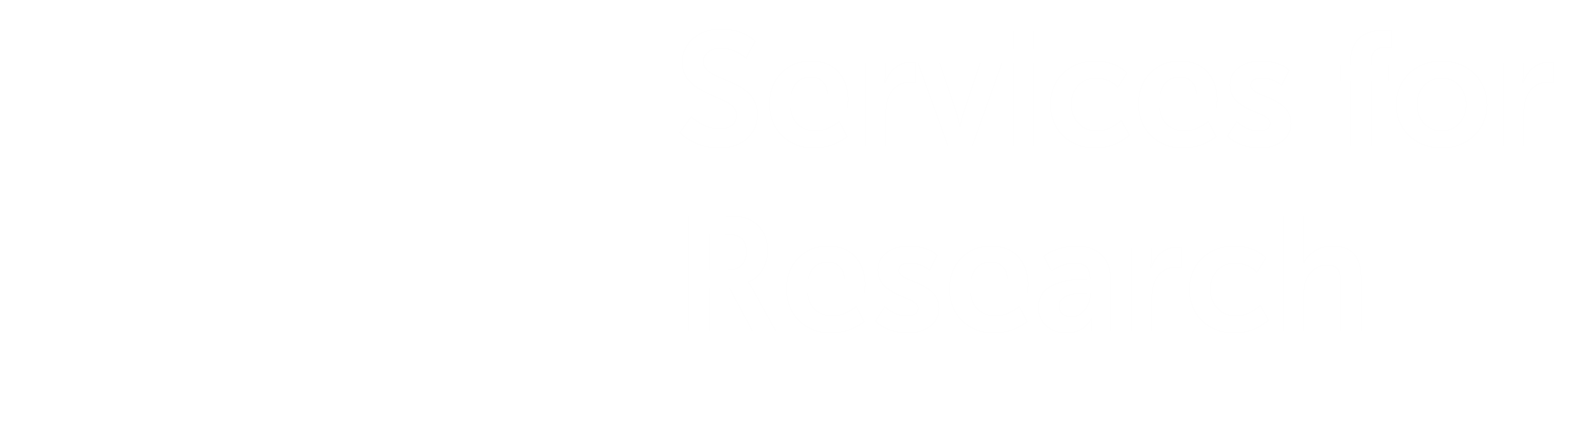 CSC Services for Research